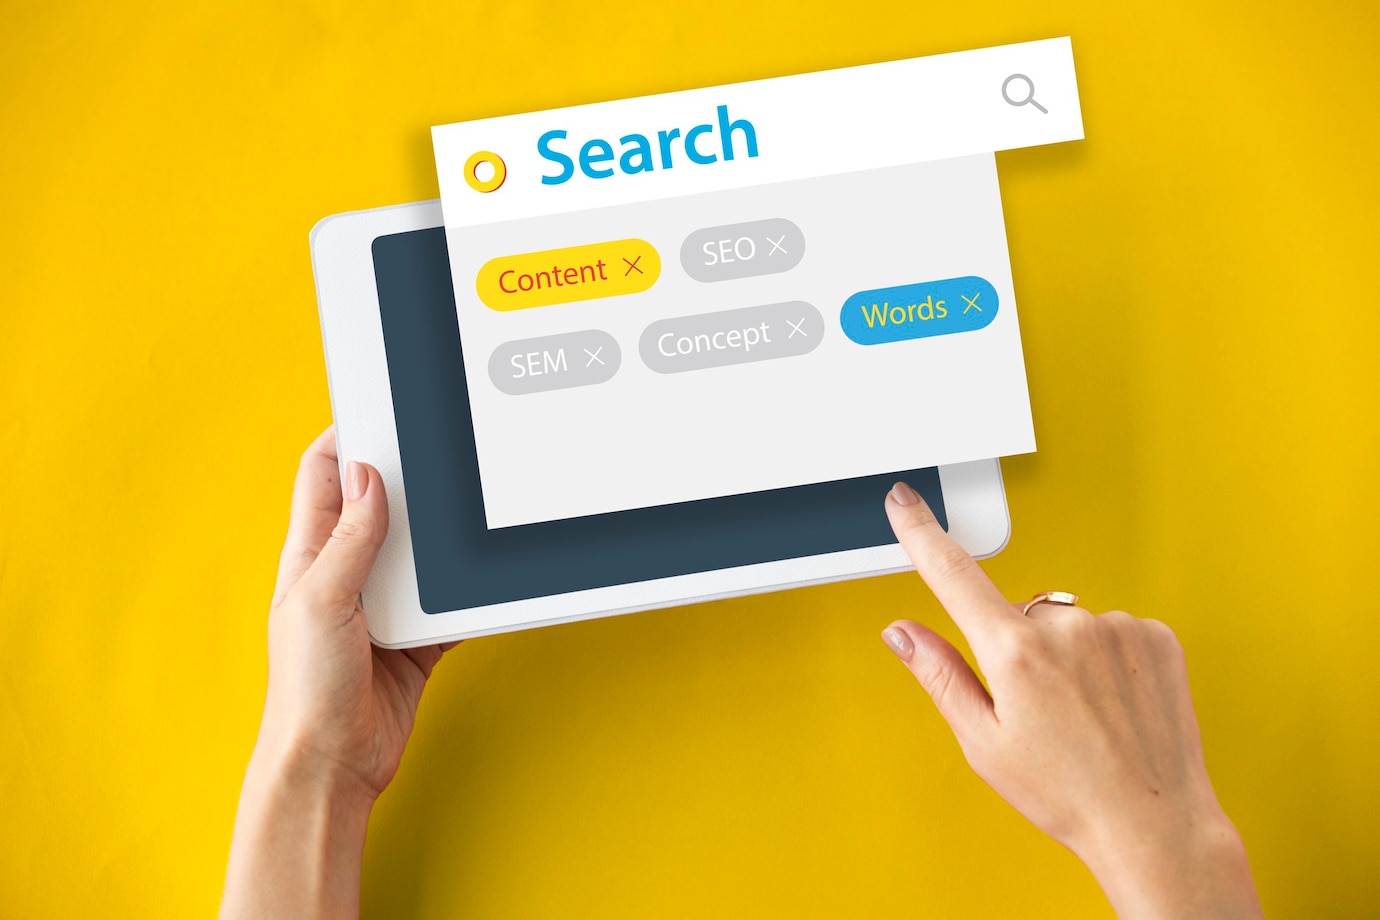 Search Engine Results Pages: A Guide to SEO